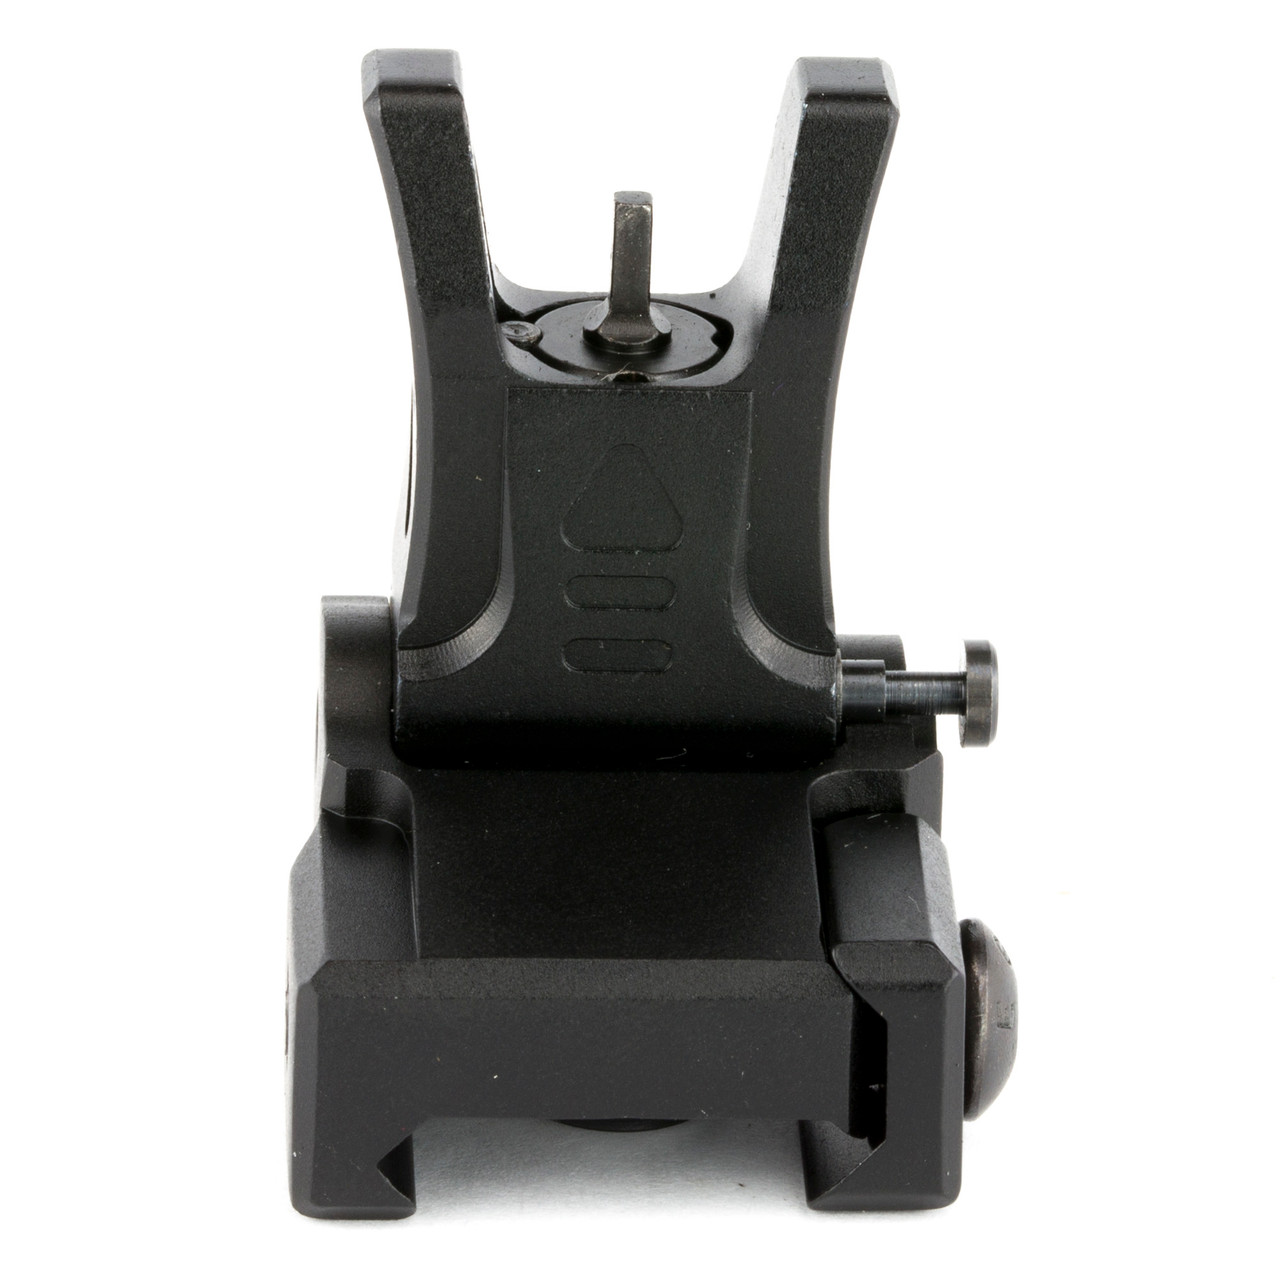 Leapers, Inc. - UTG, Sight, Flip-Up Front Sight, Low Profile, Fits Picatinny, Black Finish